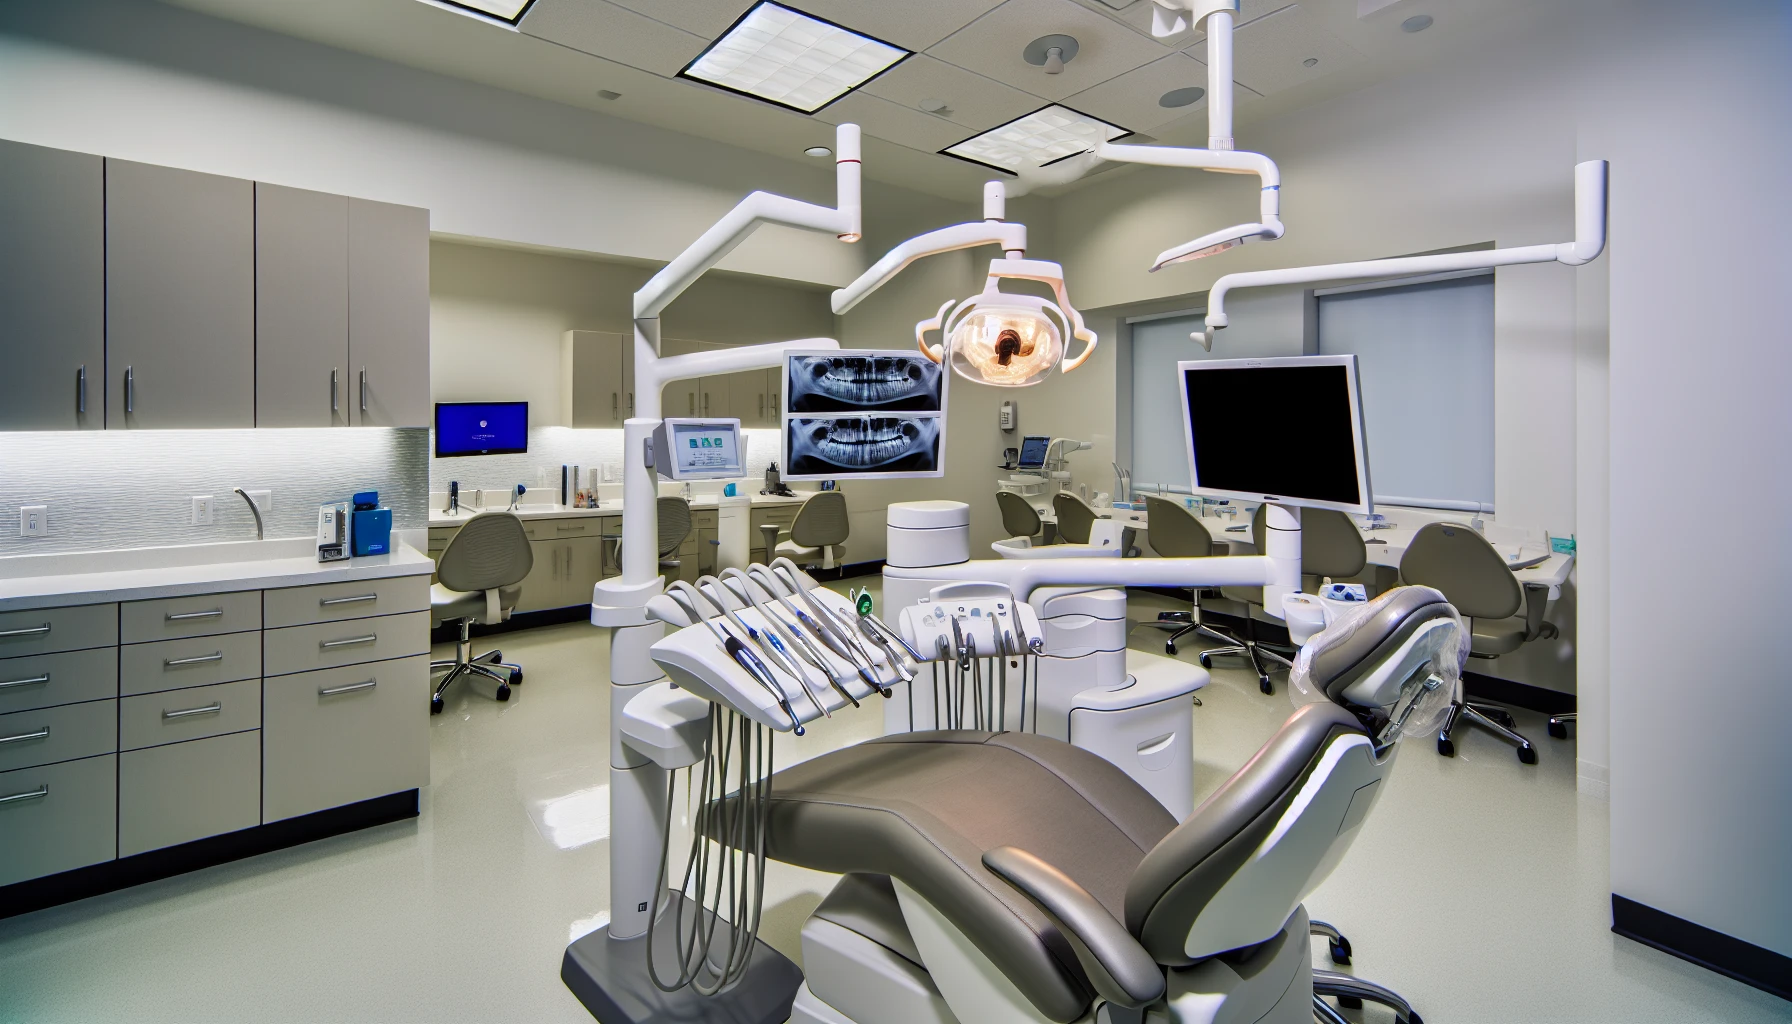 Dental clinic interior with modern equipment